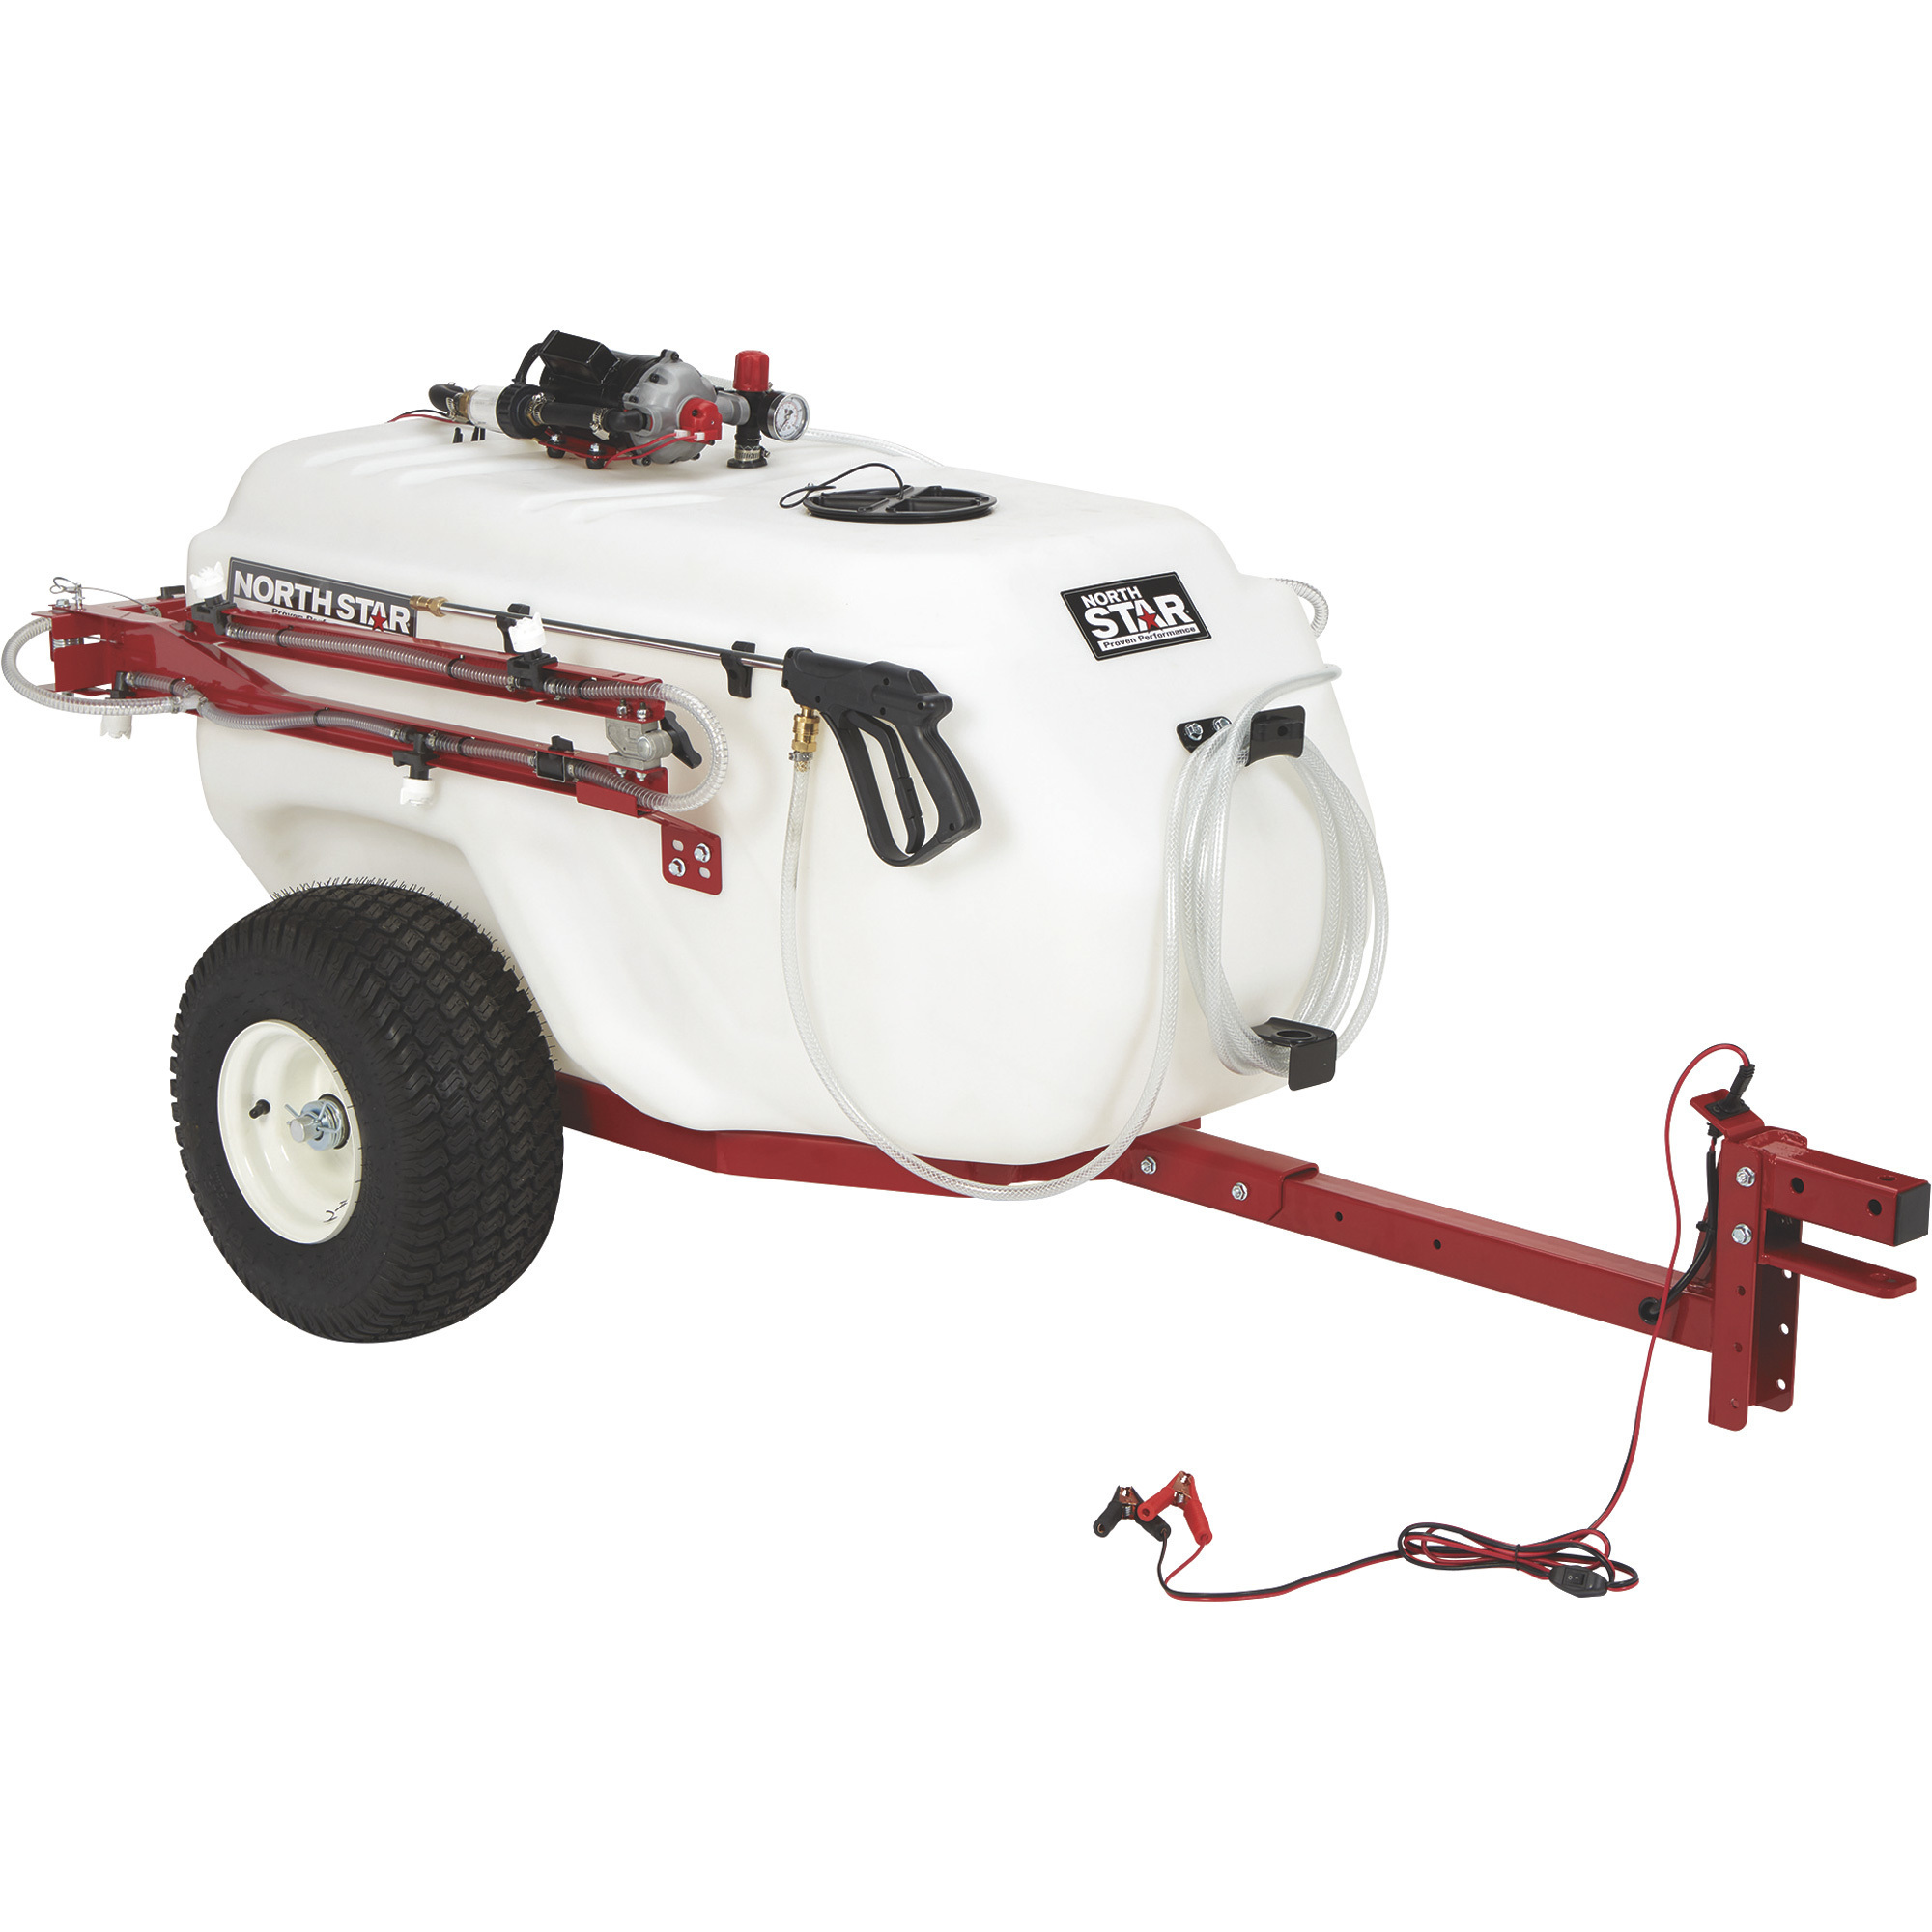 NorthStar Tow-Behind Trailer Boom Broadcast and Spot Sprayer â 101-Gallon, 7.0 GPM, 12V DC, Model 282592